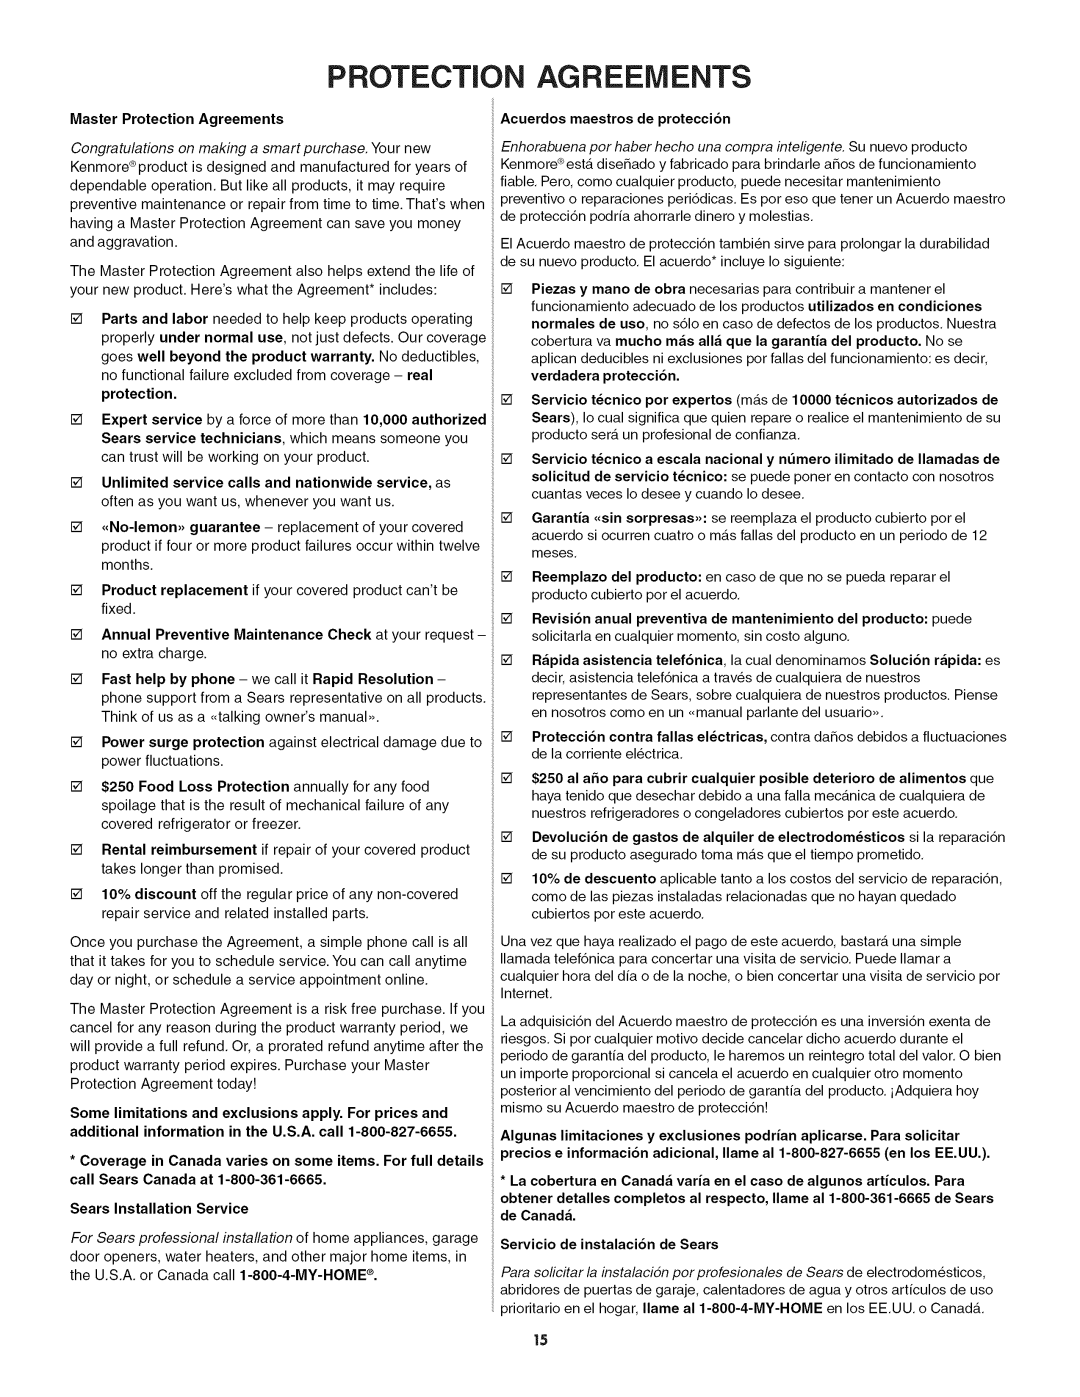 Kenmore 790.4422 manual Master Protection Agreements 